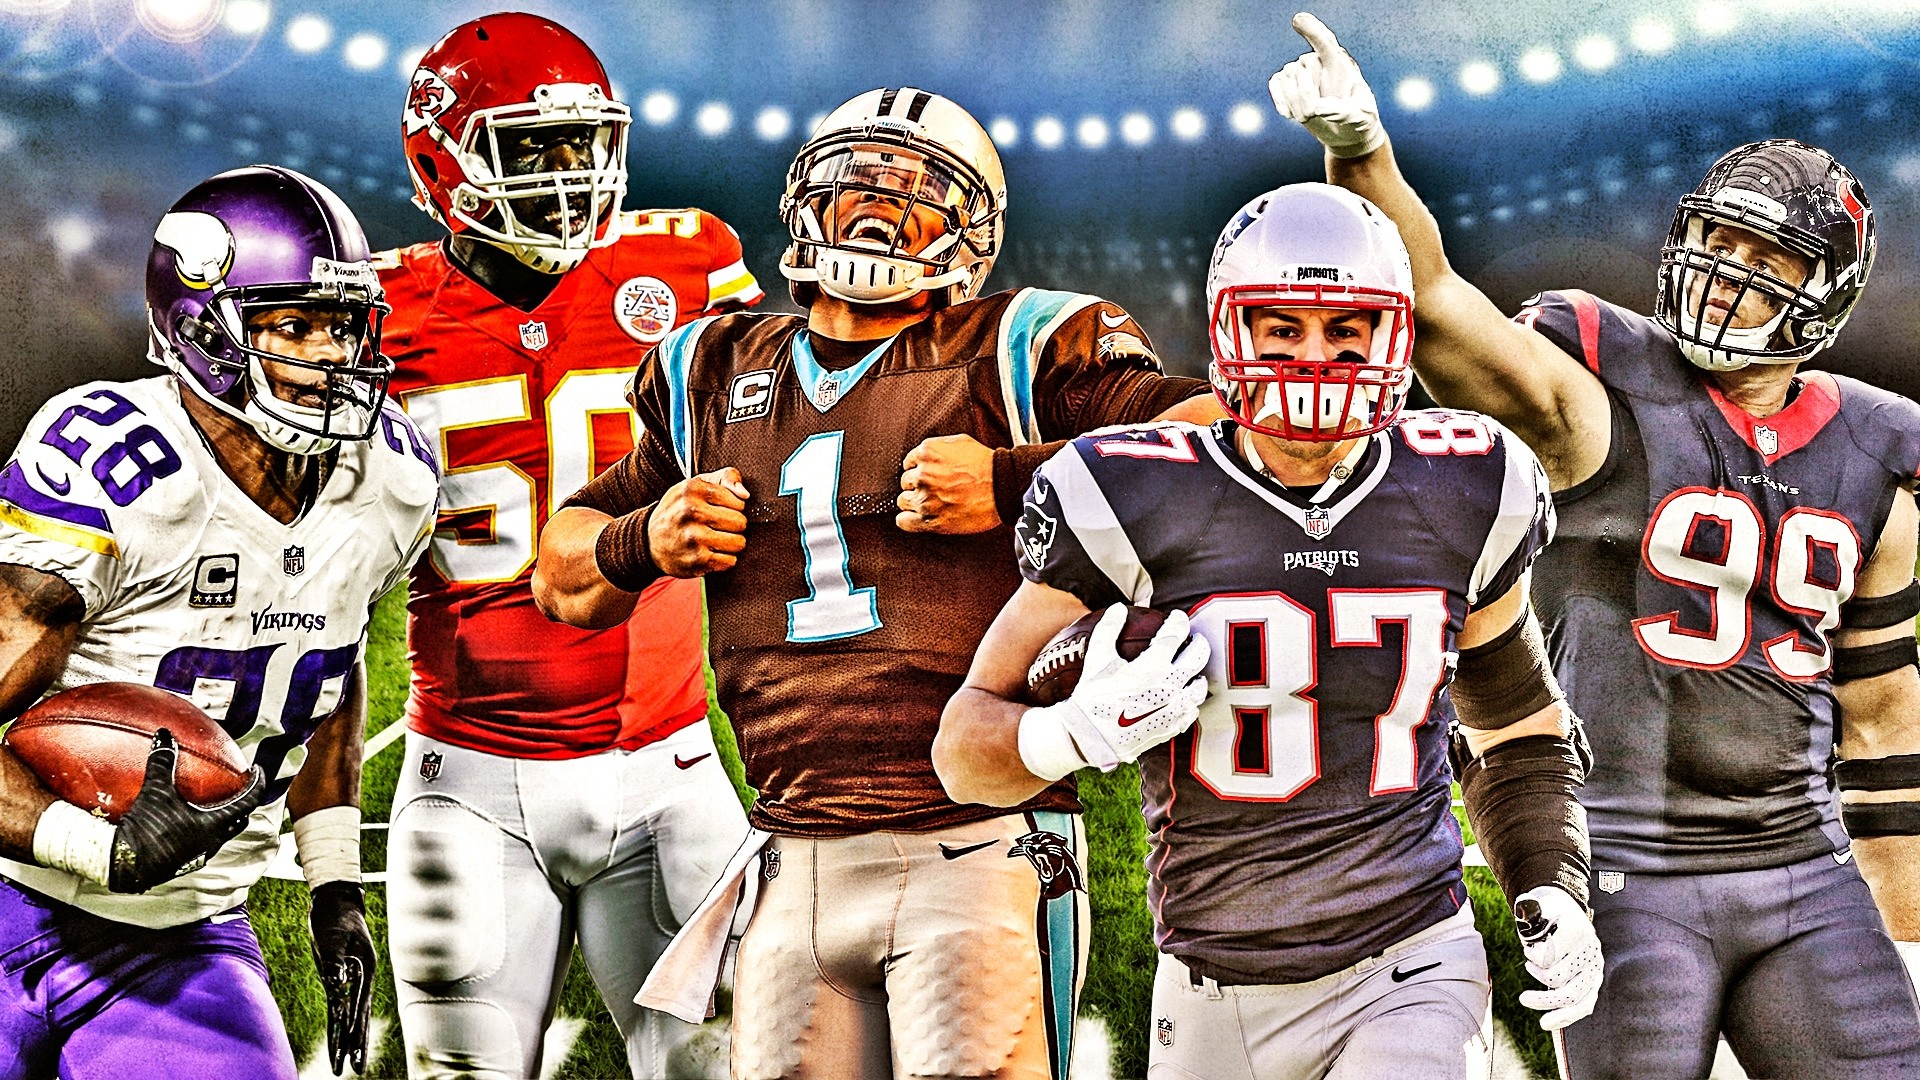 NFL Football Teams Wallpapers (61+ images)